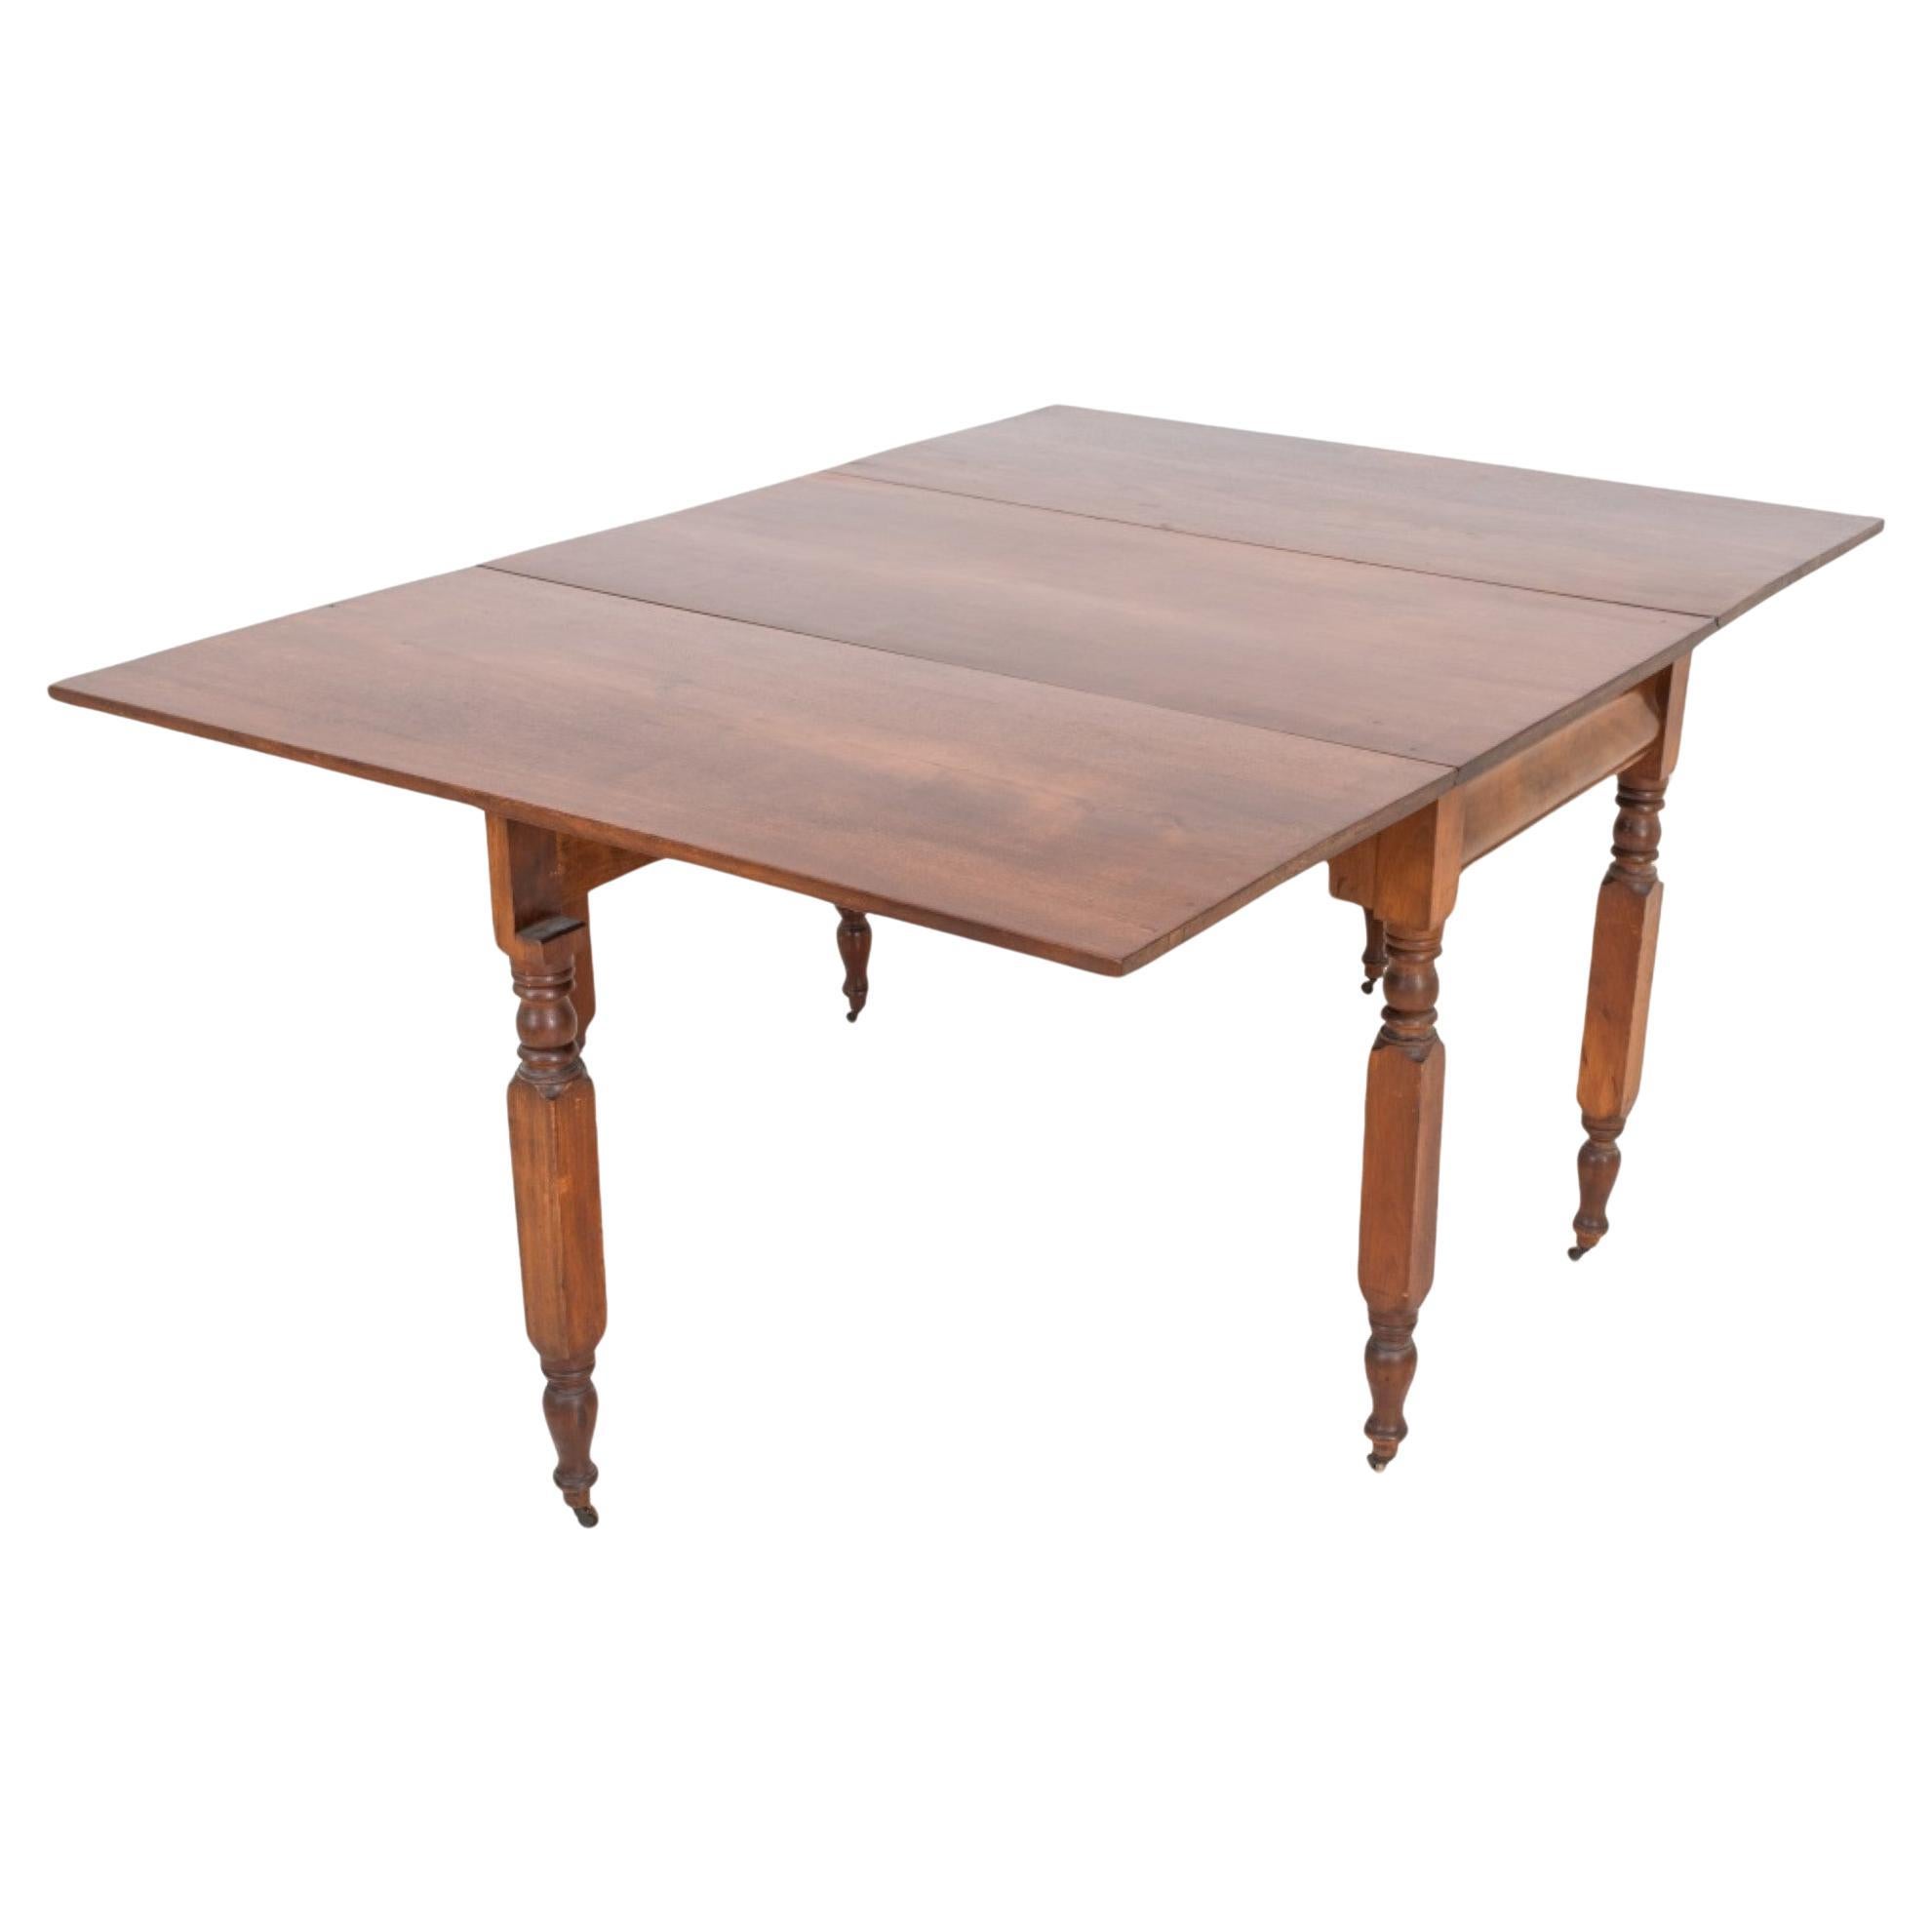 English Victorian Drop Leaf Dining Table, 19th C.